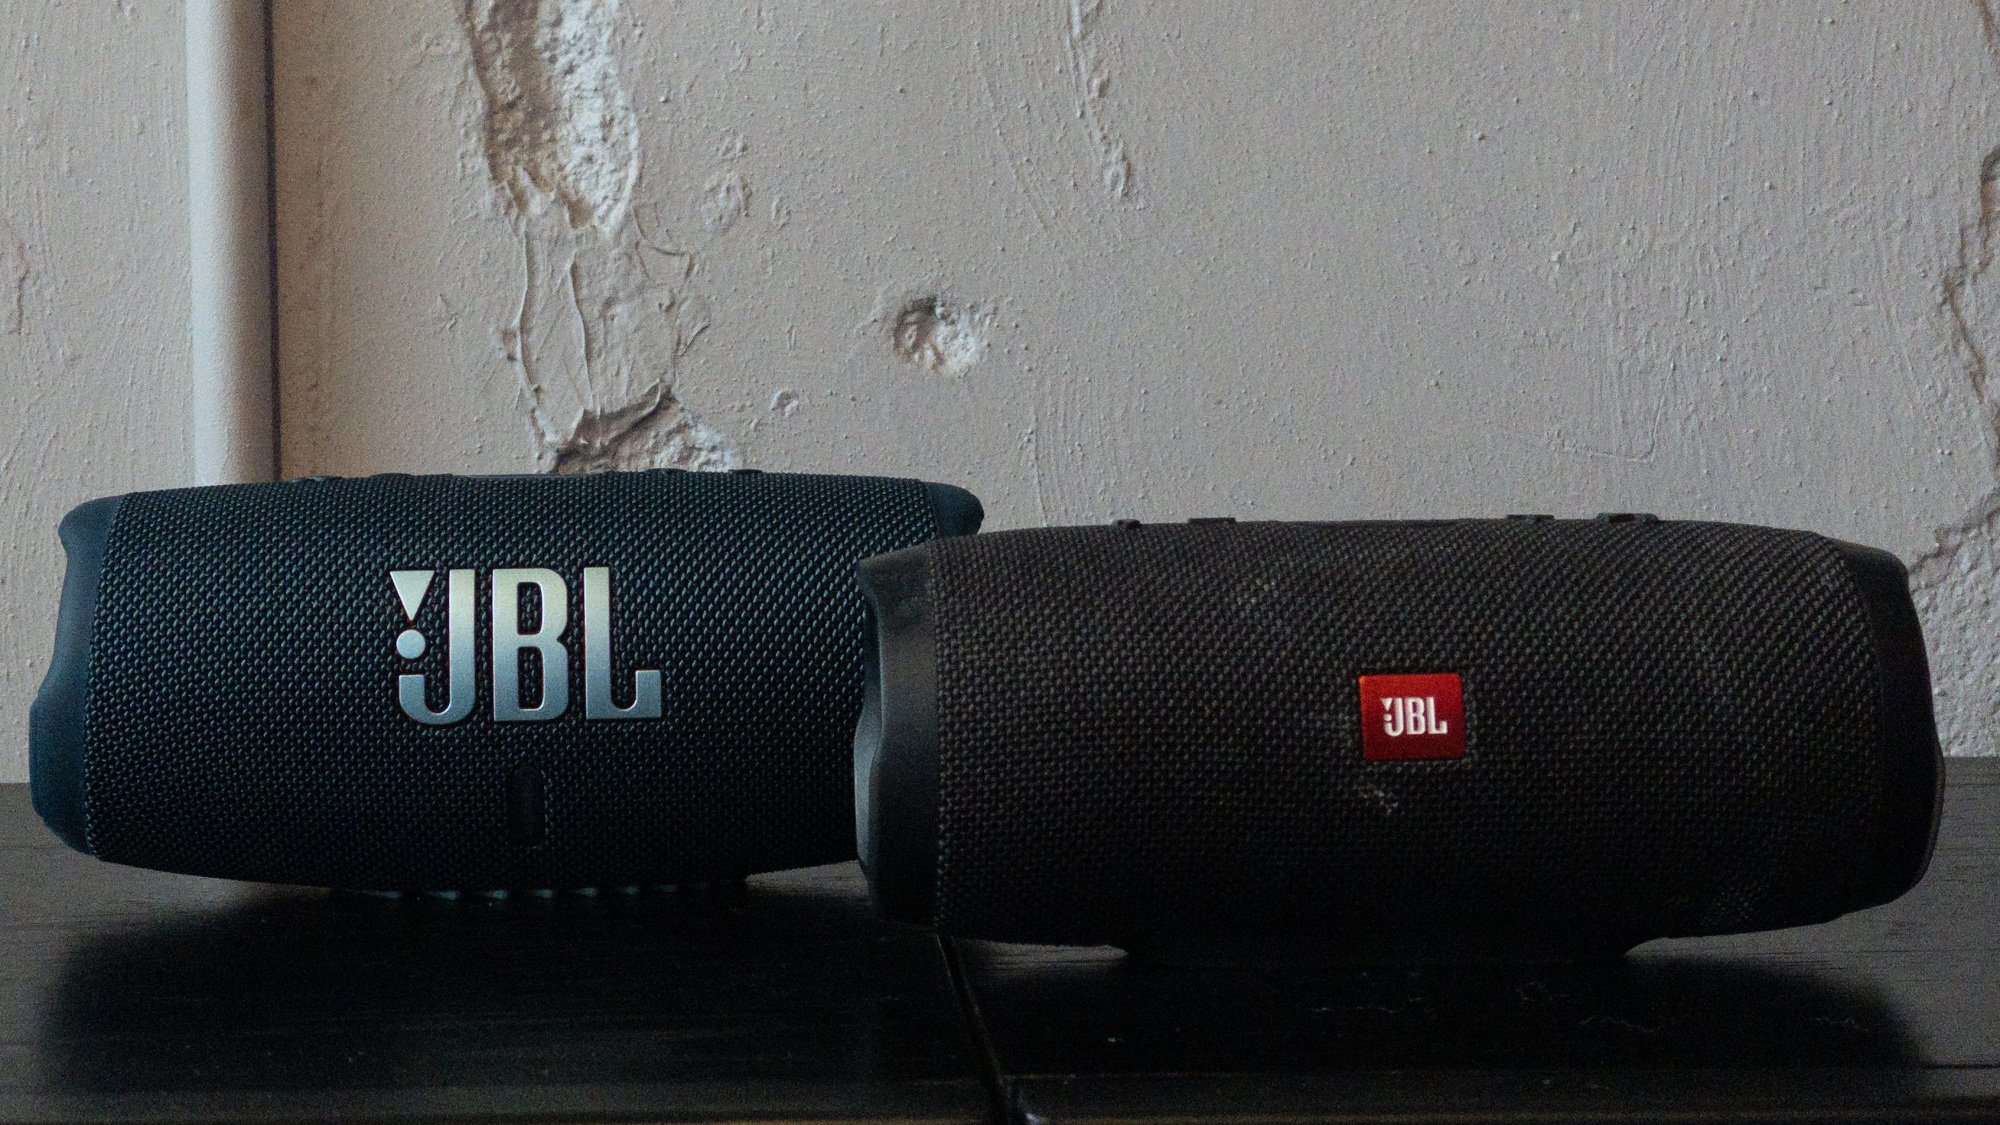 jbl charge 5 and jbl charge 3 speakers next to each other